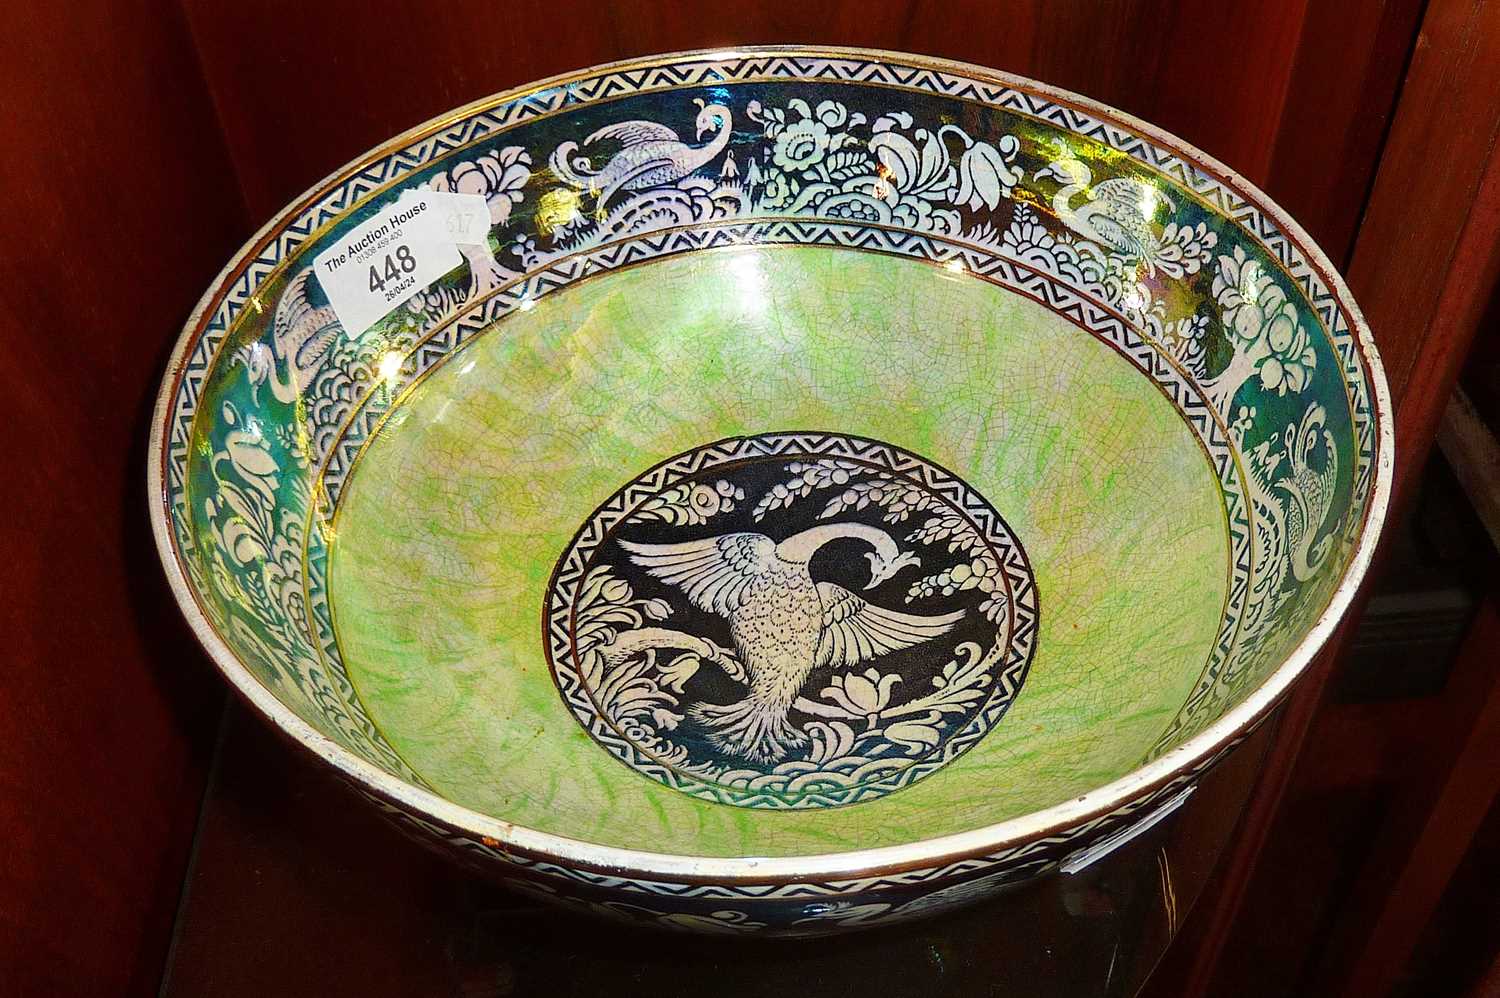 A New Hall china Boumier ware lustre bowl, 9" diameter